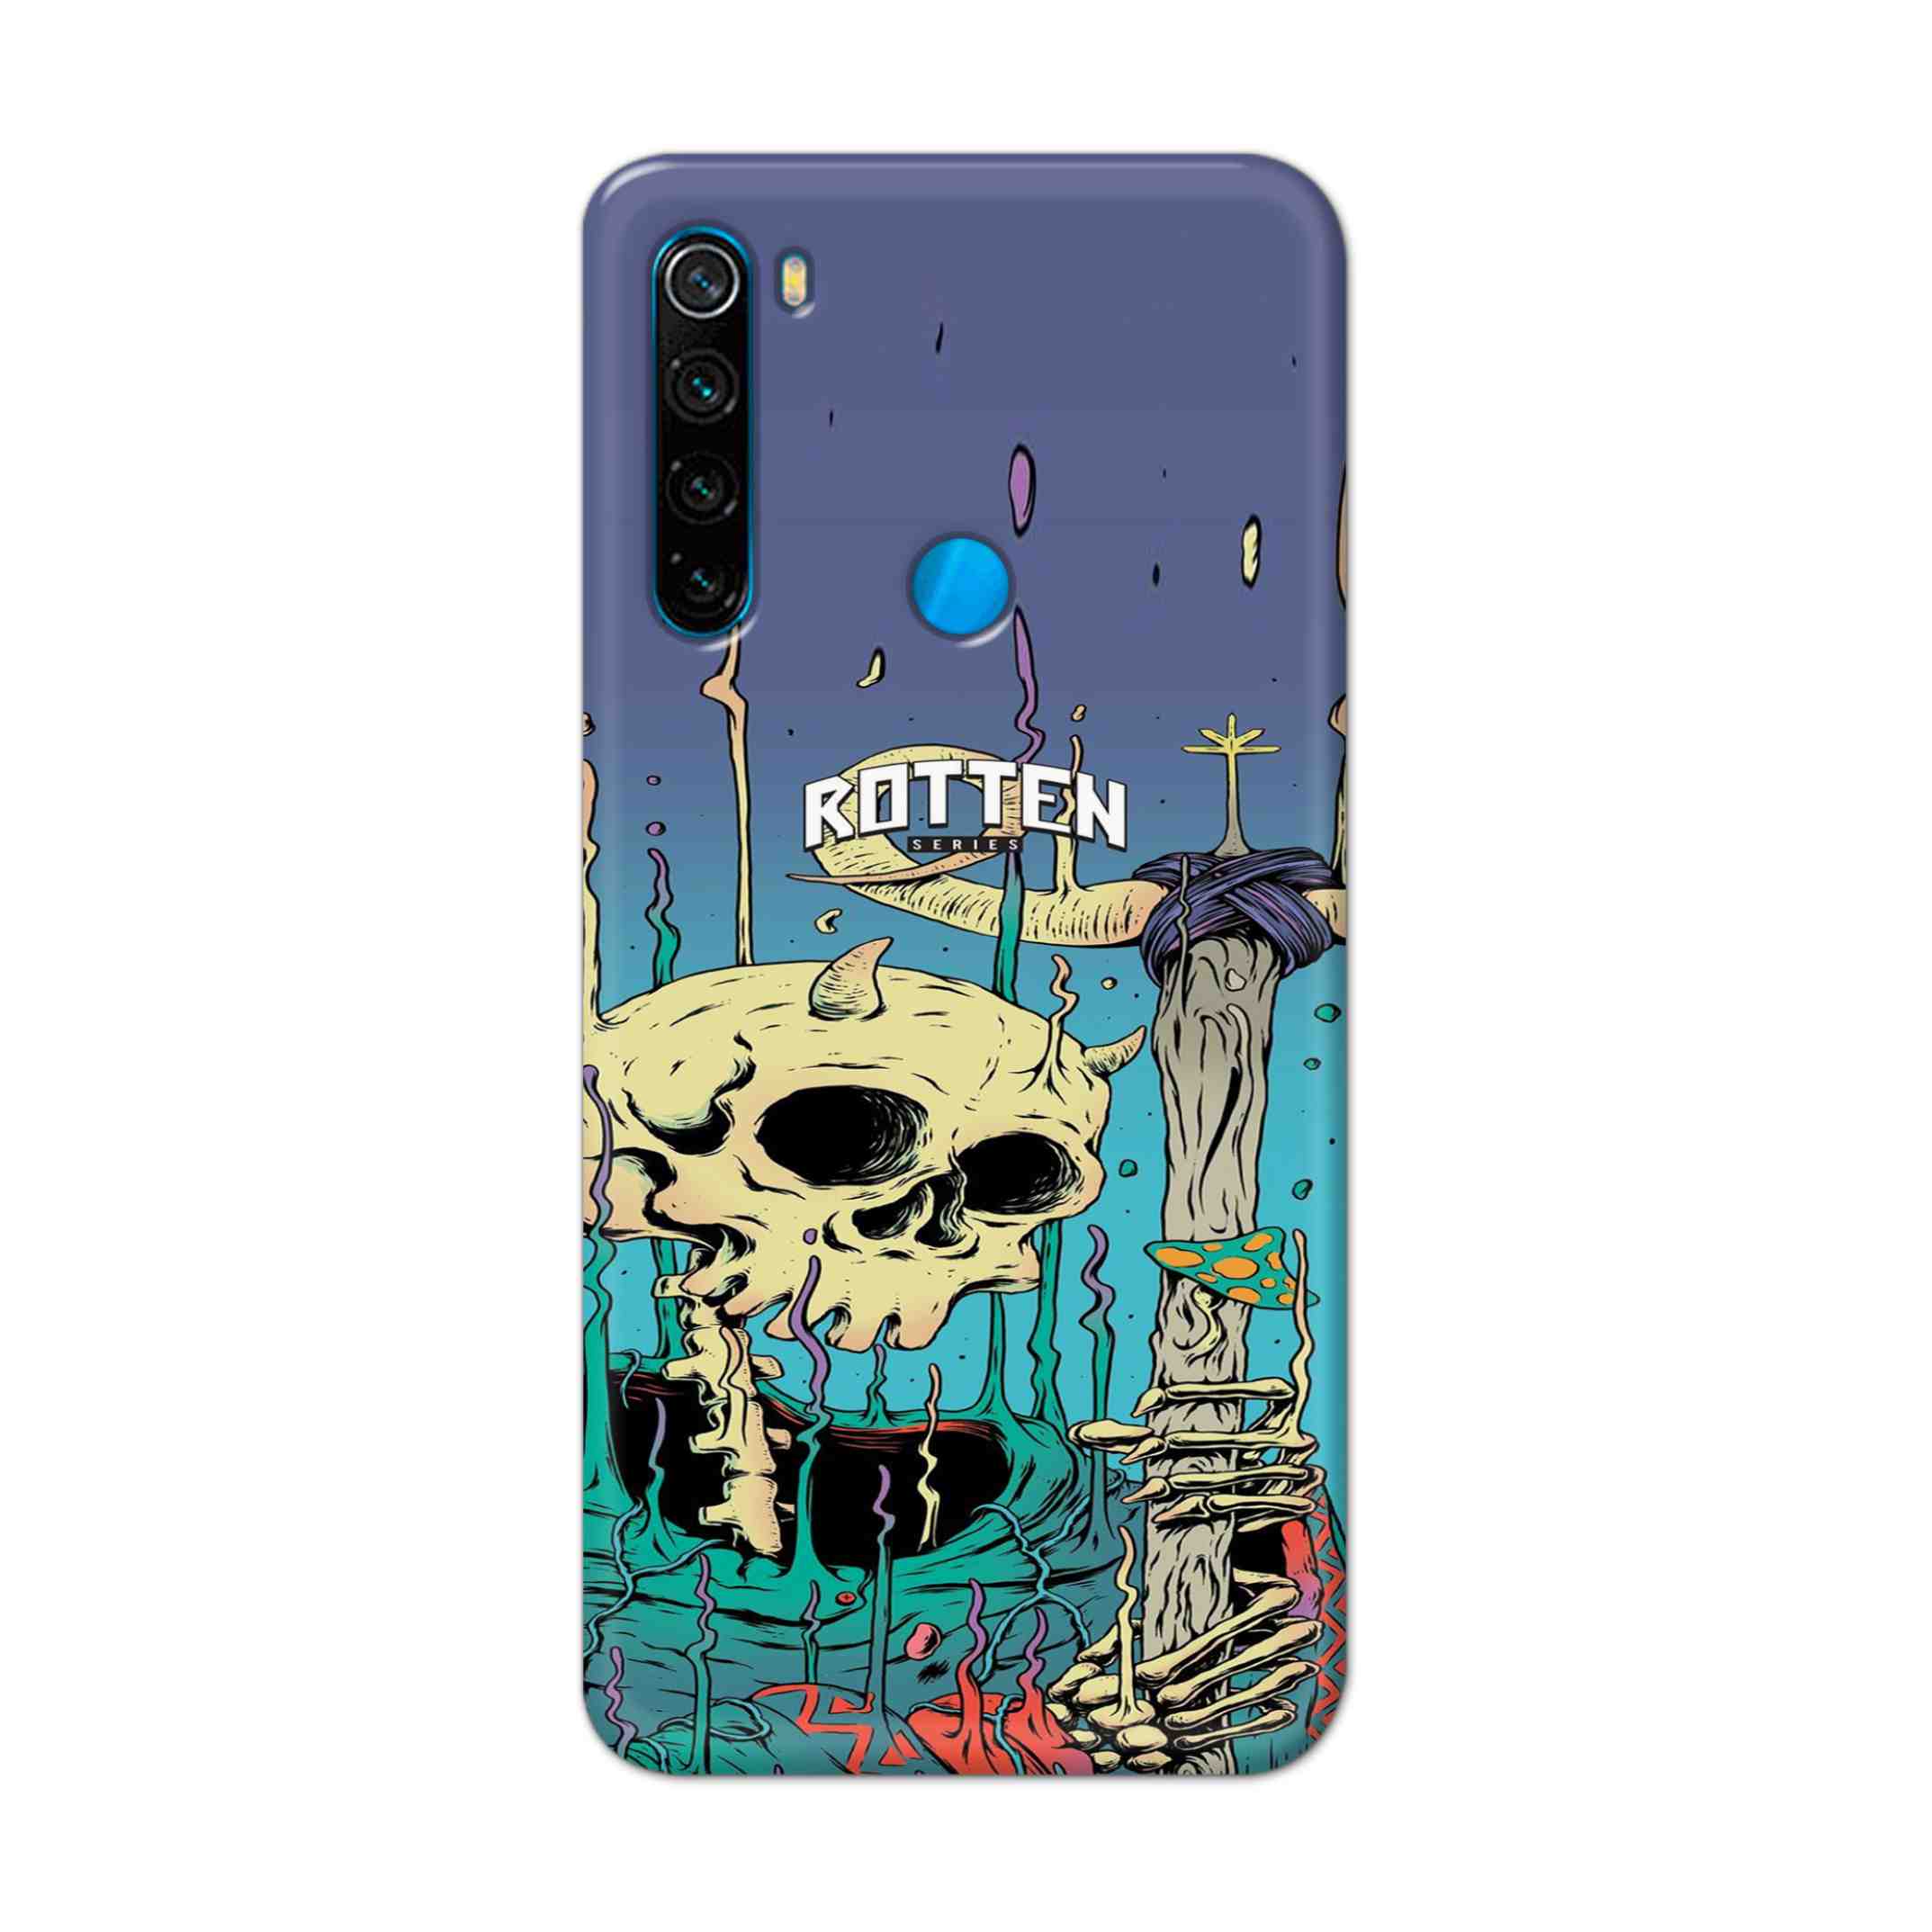 Buy Skull Hard Back Mobile Phone Case Cover For Xiaomi Redmi Note 8 Online